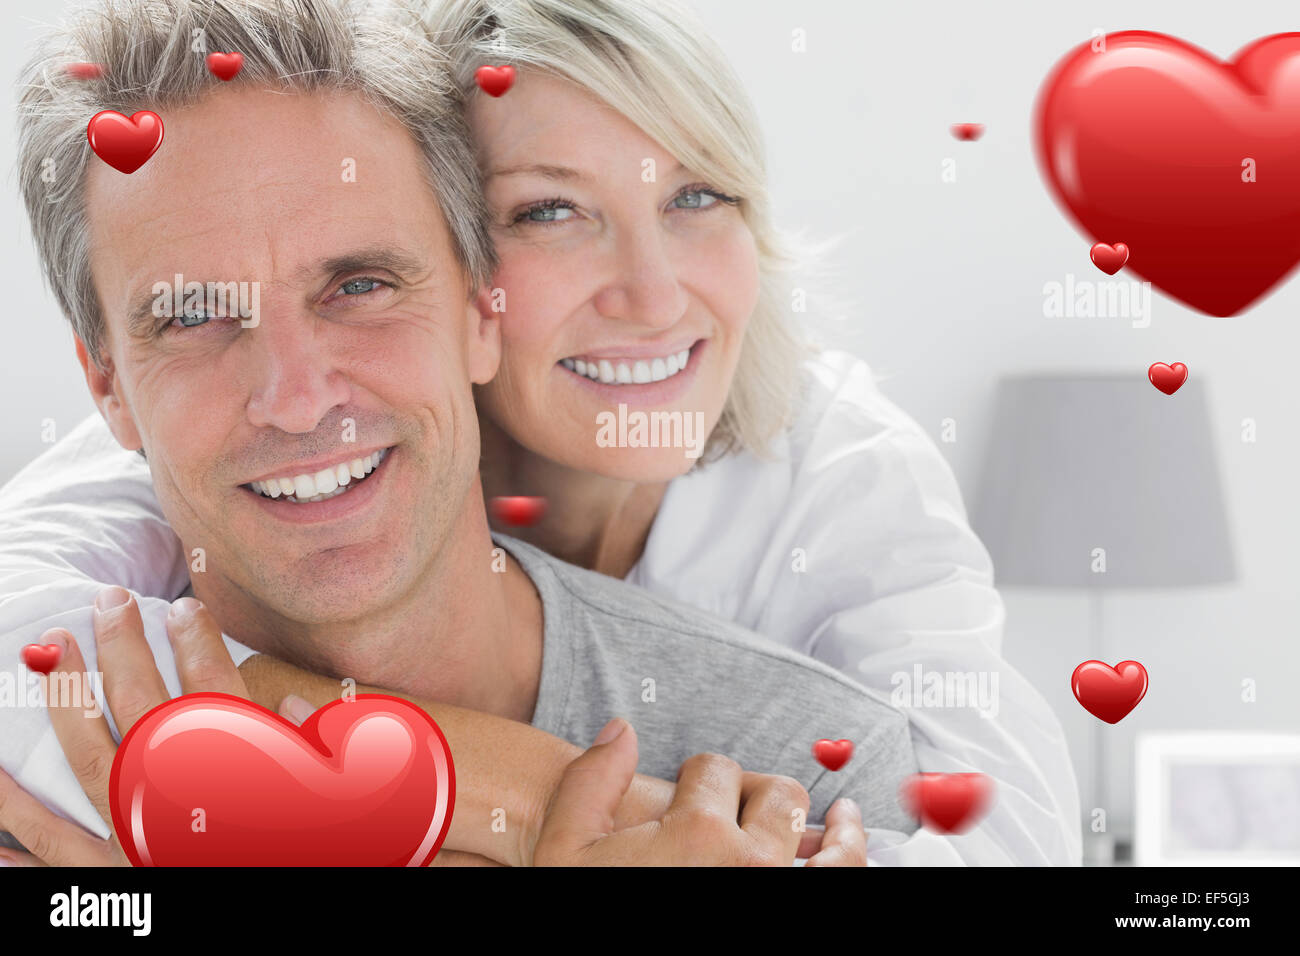 Composite image of affectionate couple smiling Stock Photo